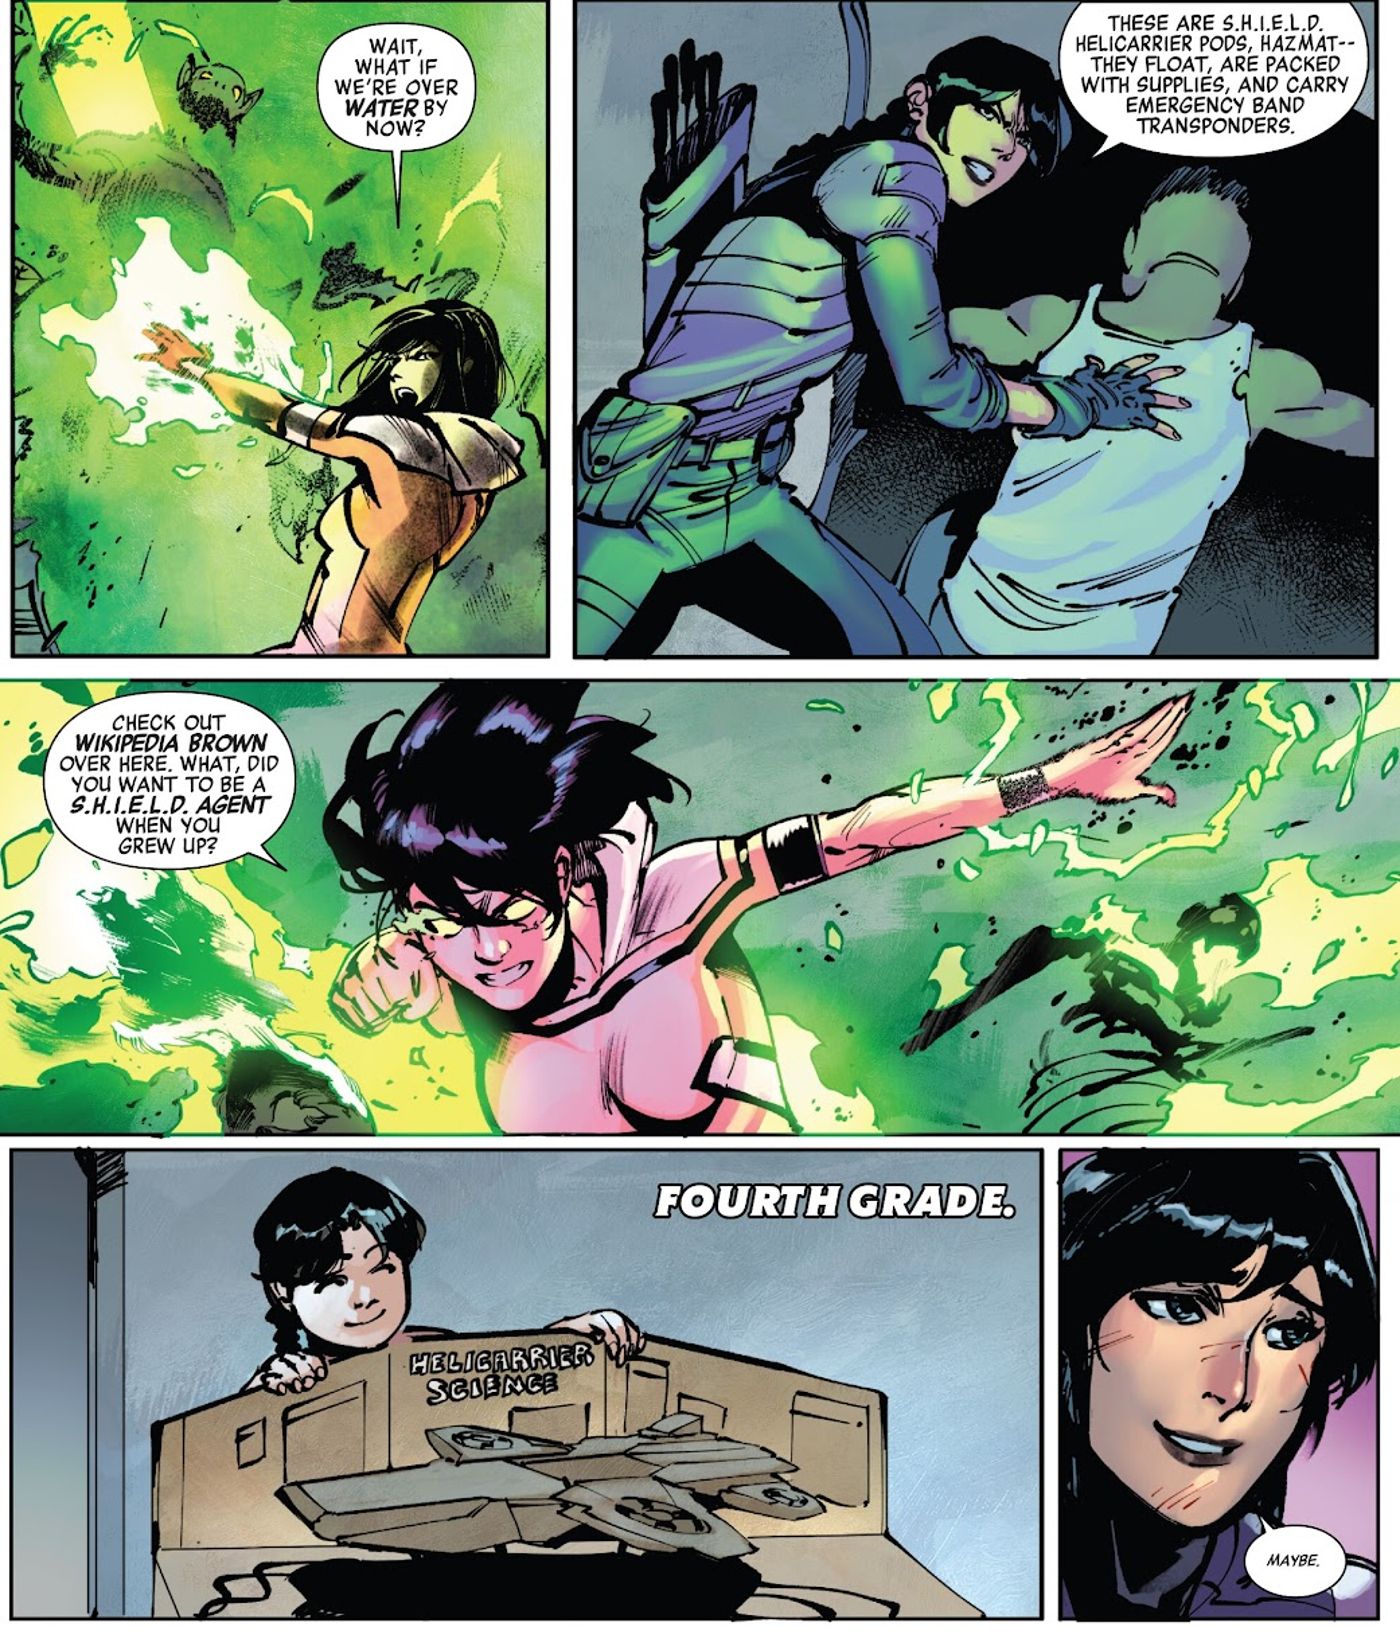 Hazmat blasts vampires (top). Flashback of Kate Bishop as a young child with a SHIELD hellicarrier toy (bottom). 